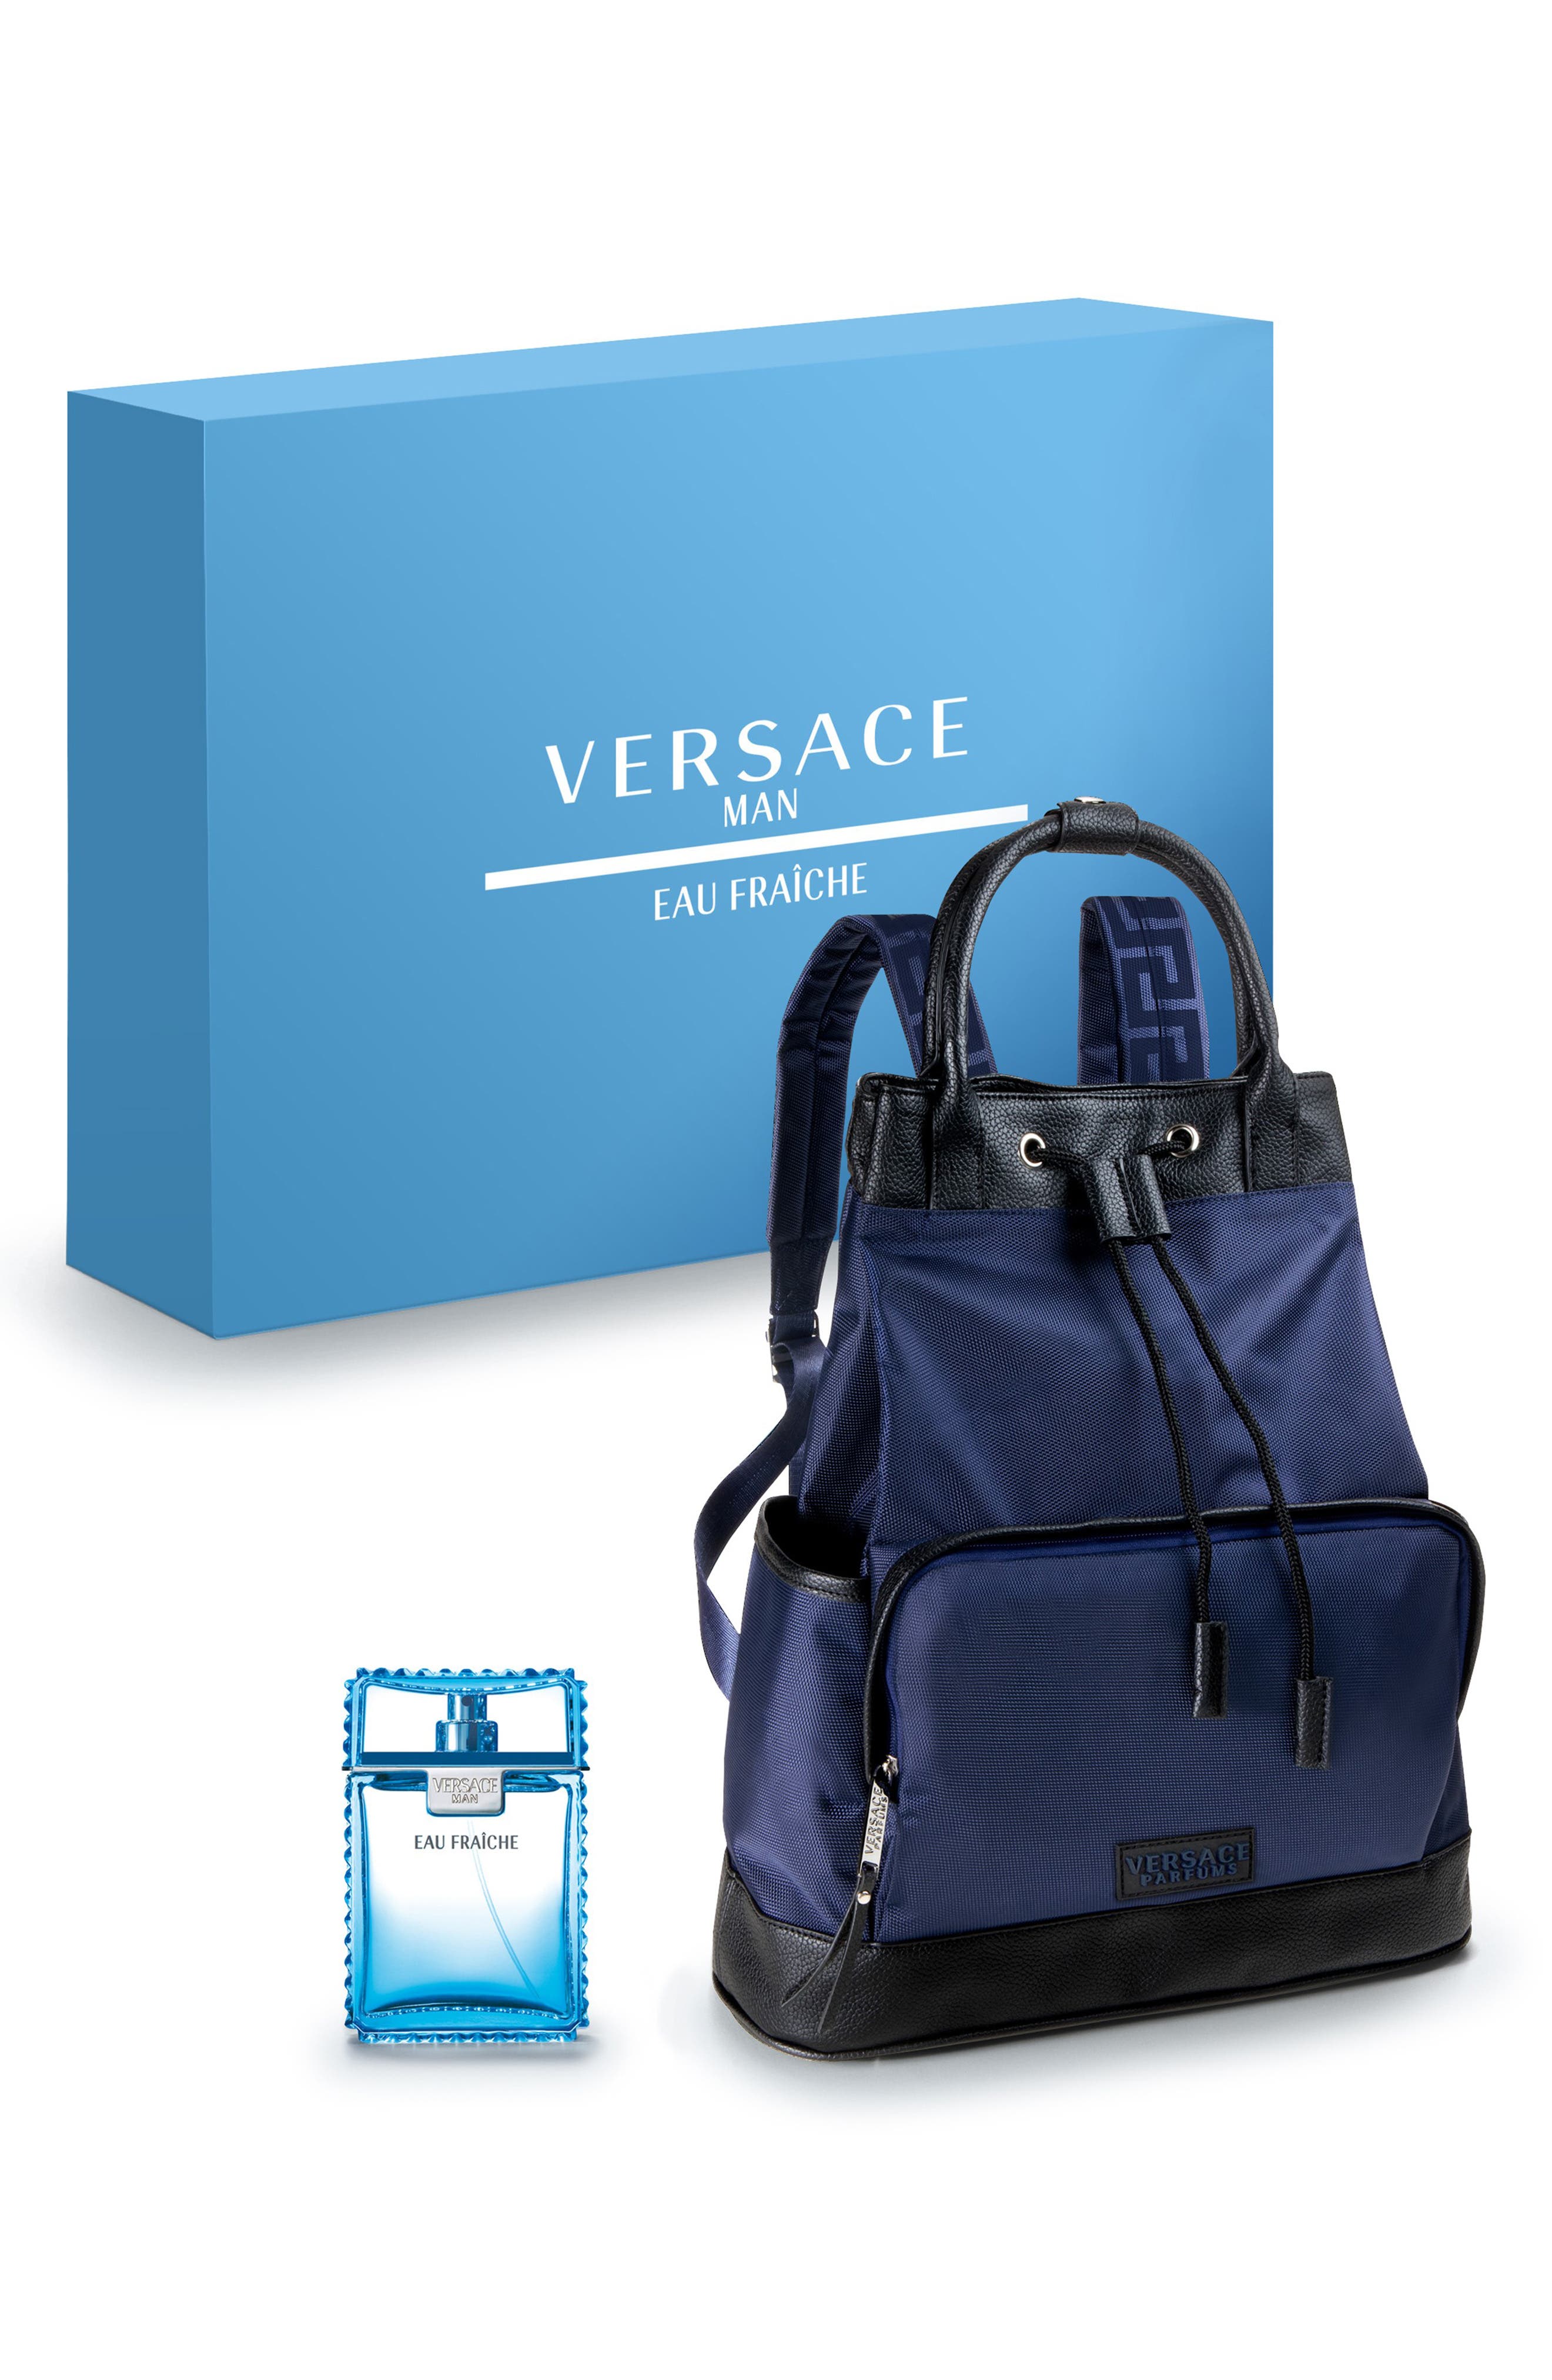 versace perfume with backpack